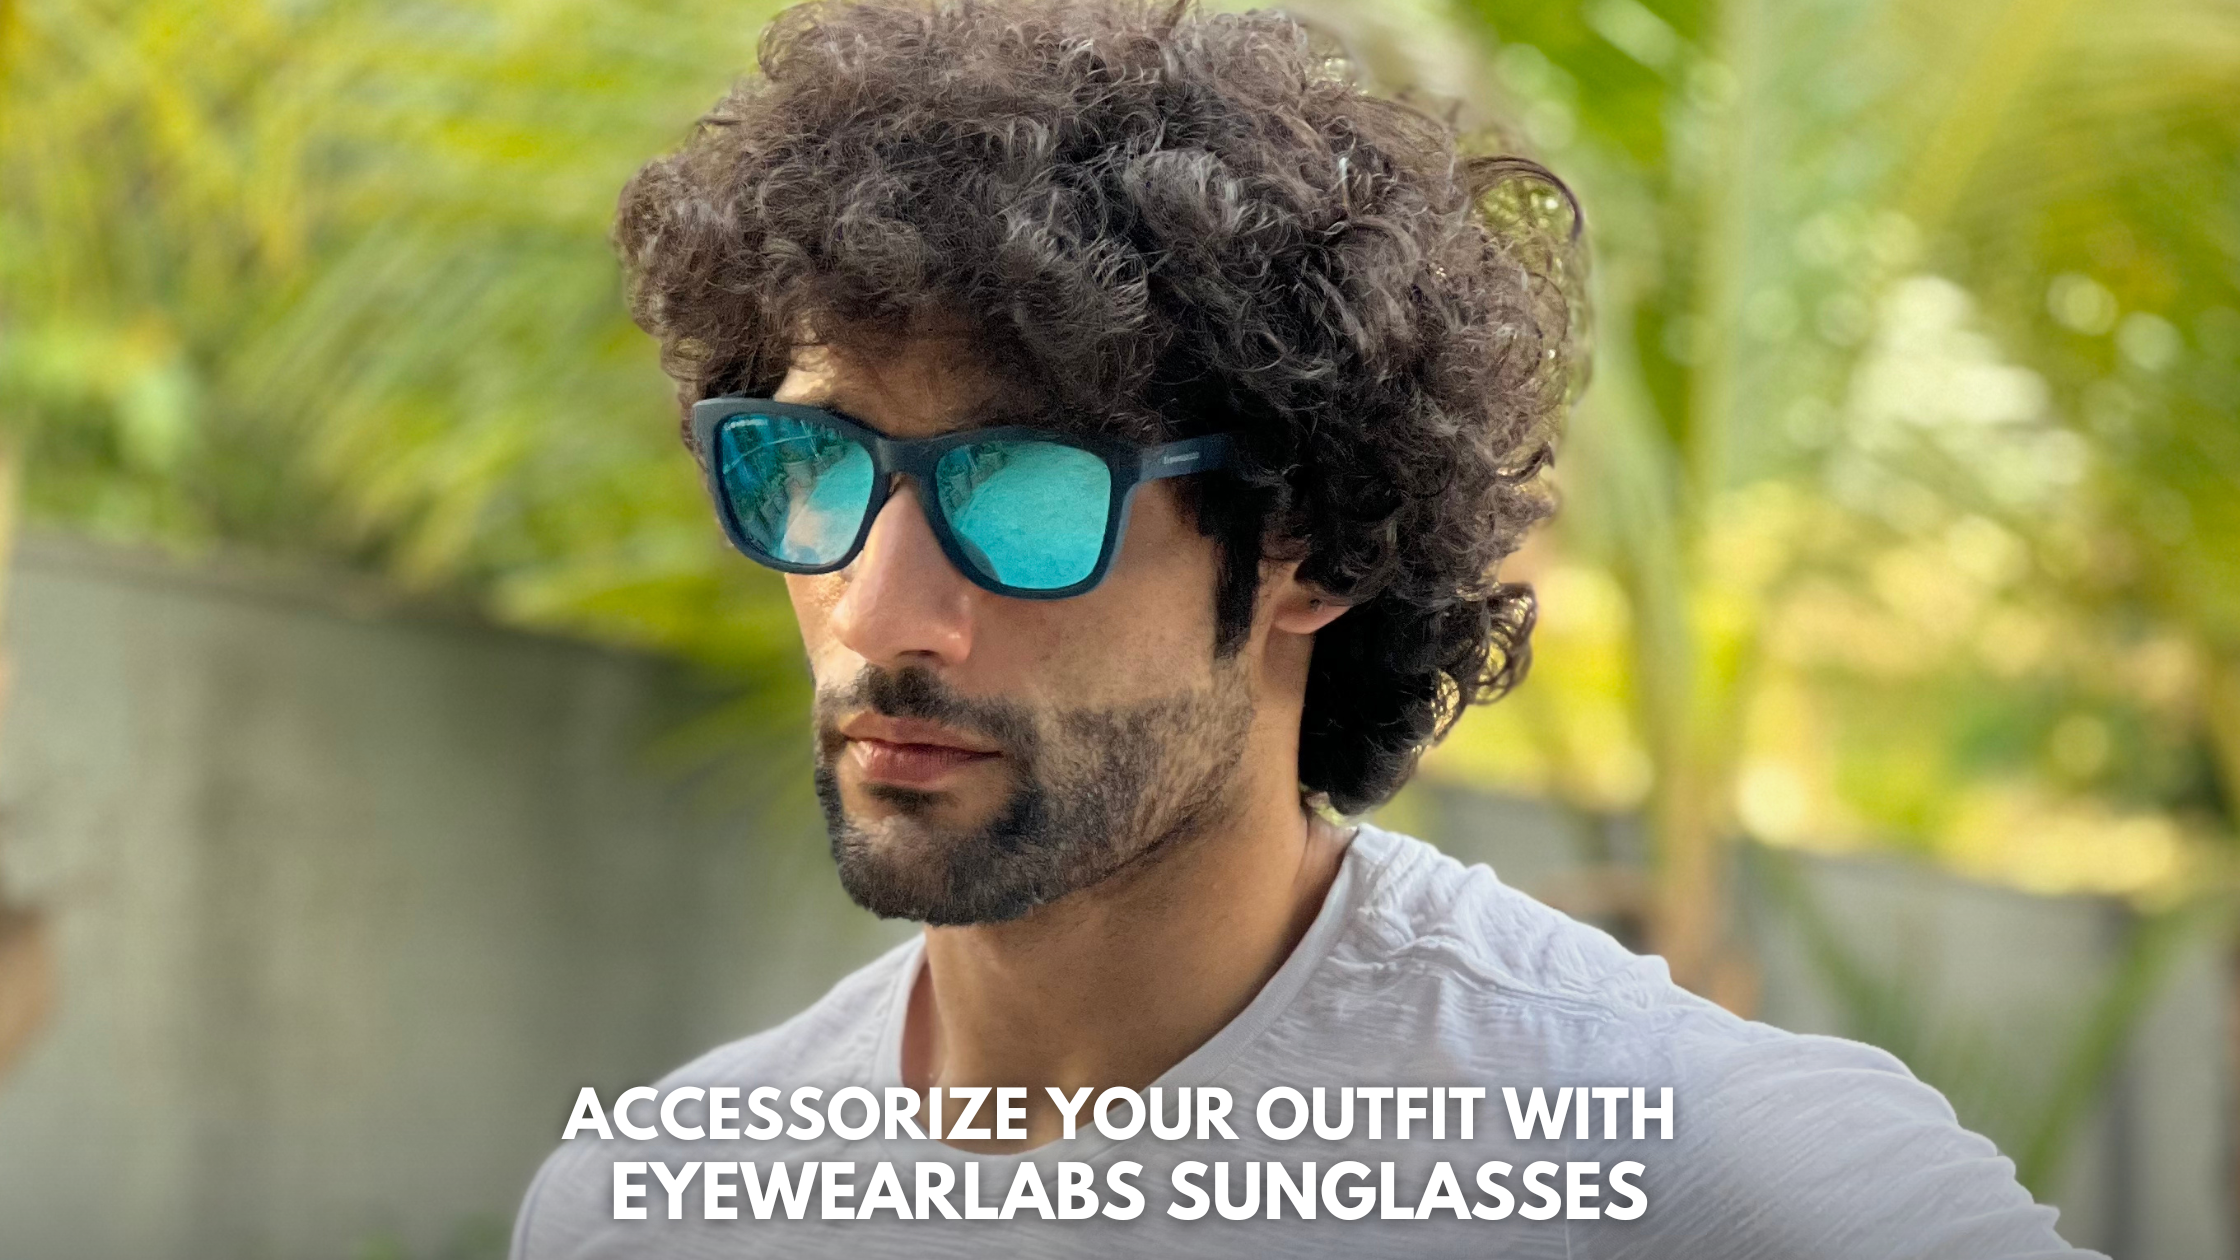 Accessorize Your Outfit with the Eyewearlabs Sunglasses